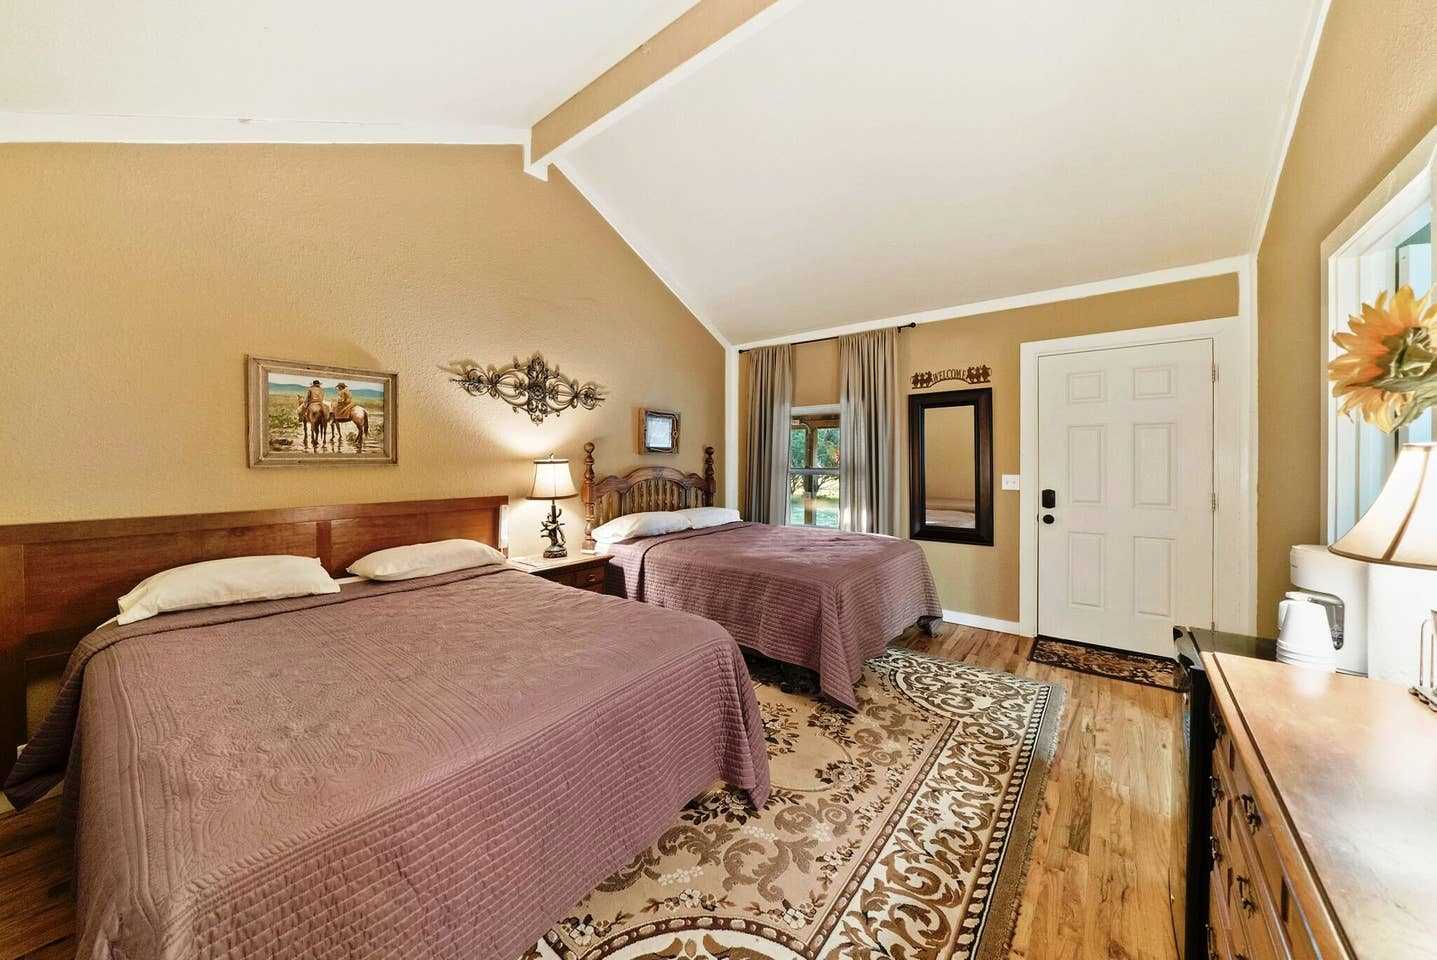                                                 Two big queen-sized beds offer a soft and comfortable place to recharge and look forward to your next Hill Country morning!